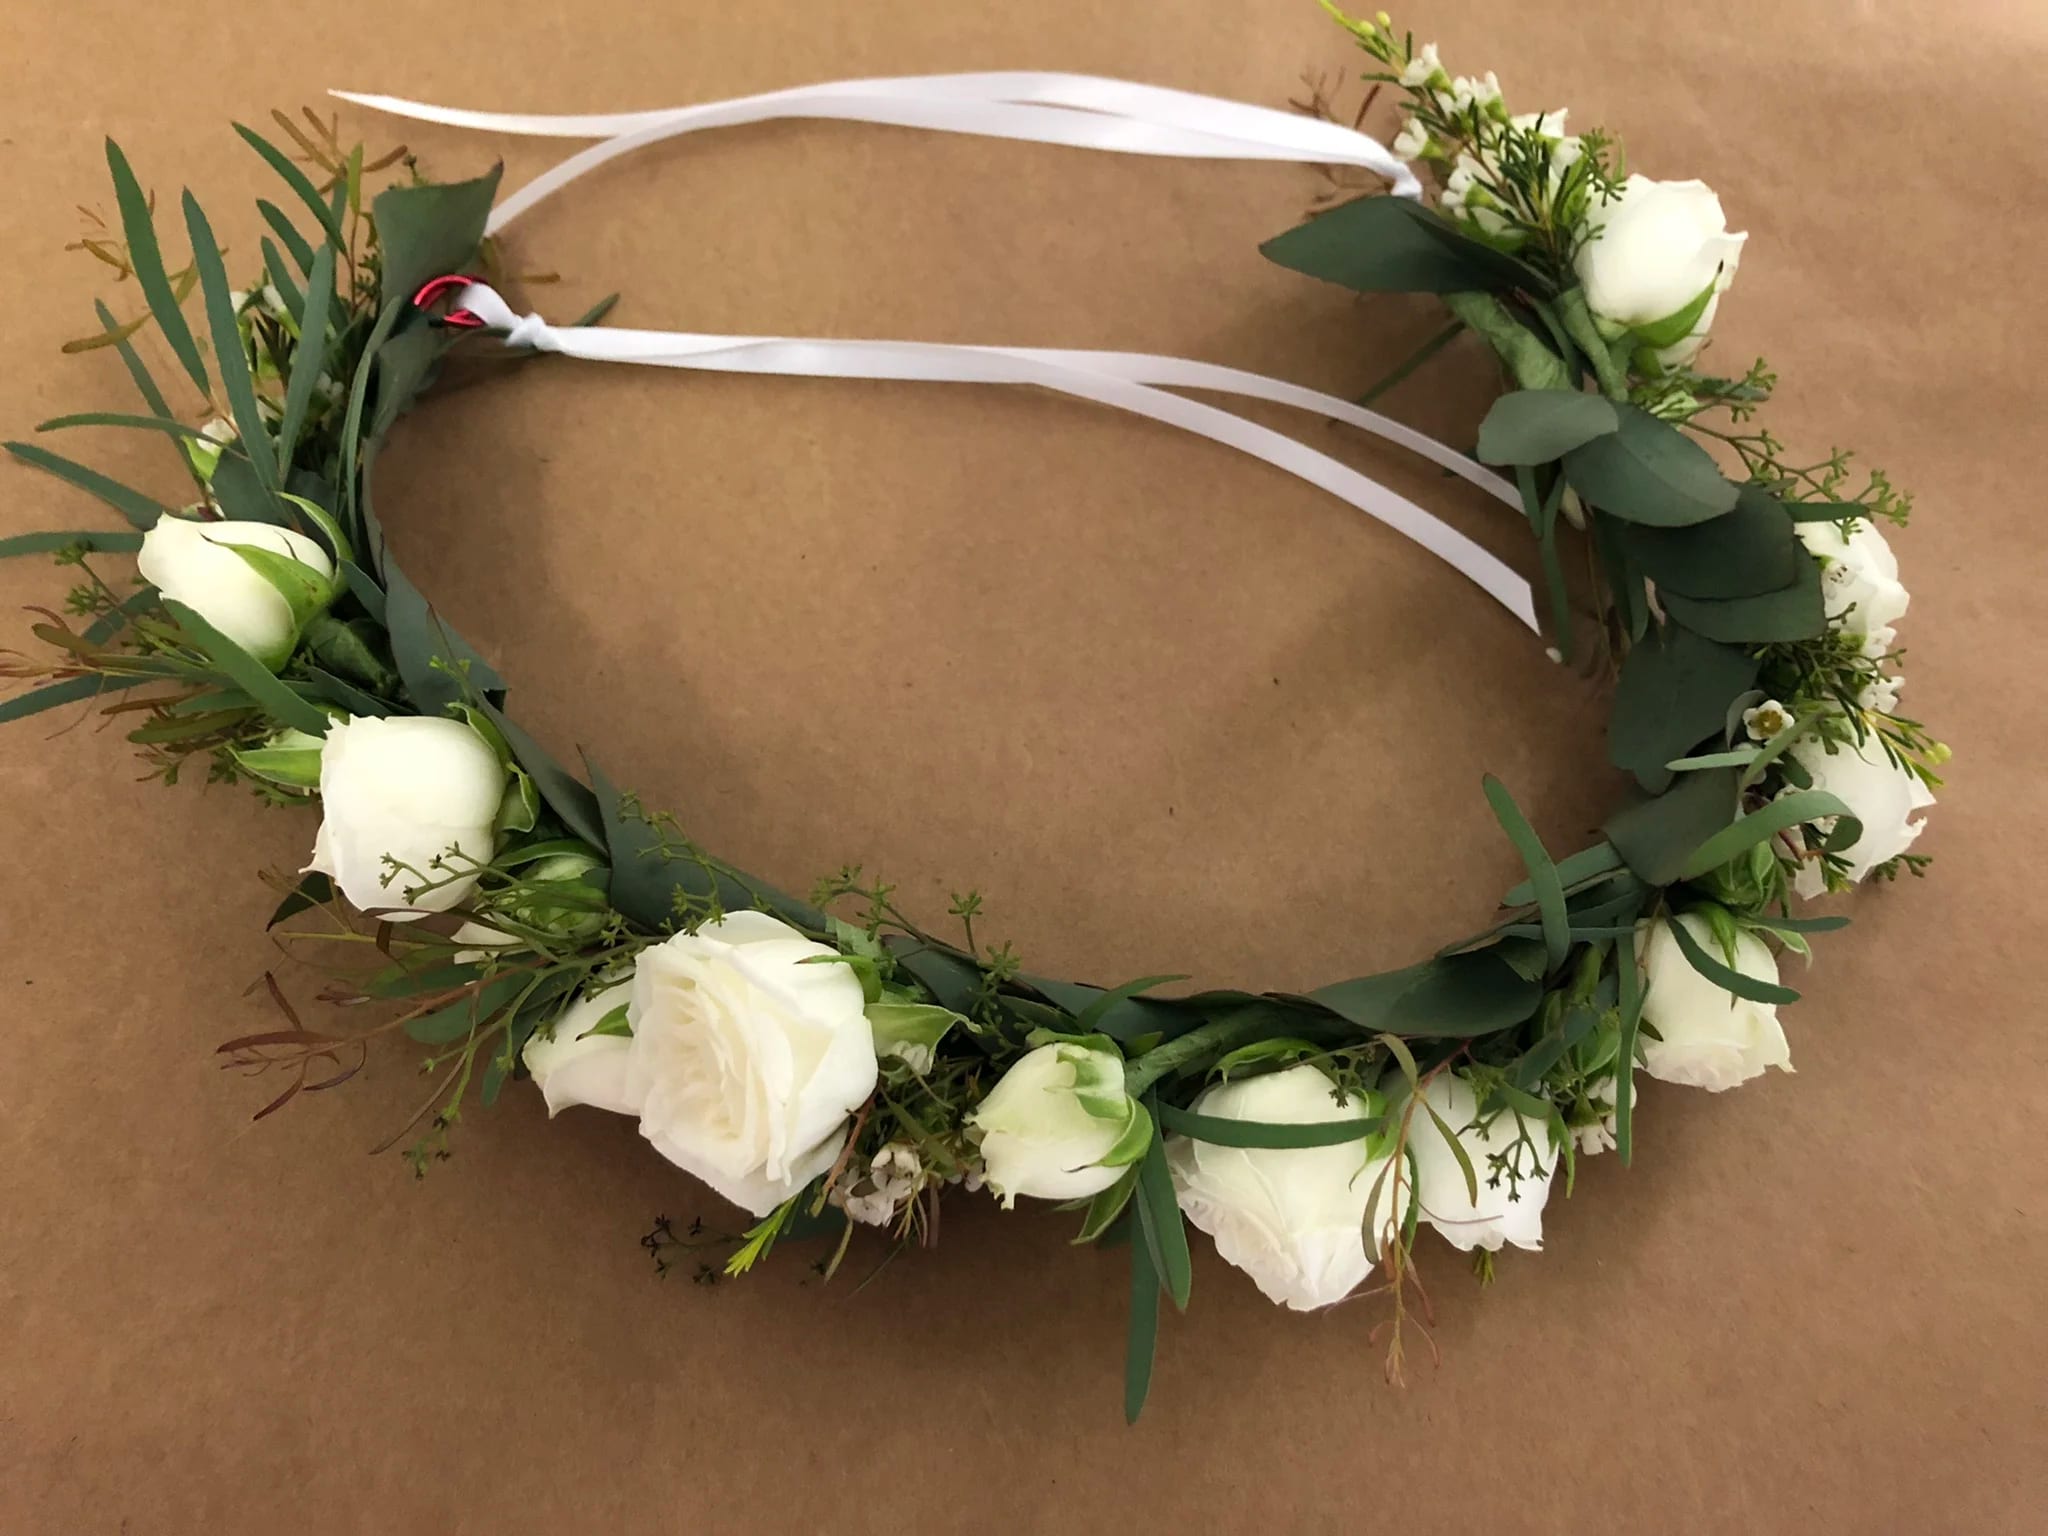 Flower crown - A birthday, or a special occasion, a wedding or graduation, flower crowns are the perfect adornment. It's personal and luxurious, flower crowns are unique and glamorous. Red Bud Florals has the expertise to create gorgeous head wreath or flower crowns.